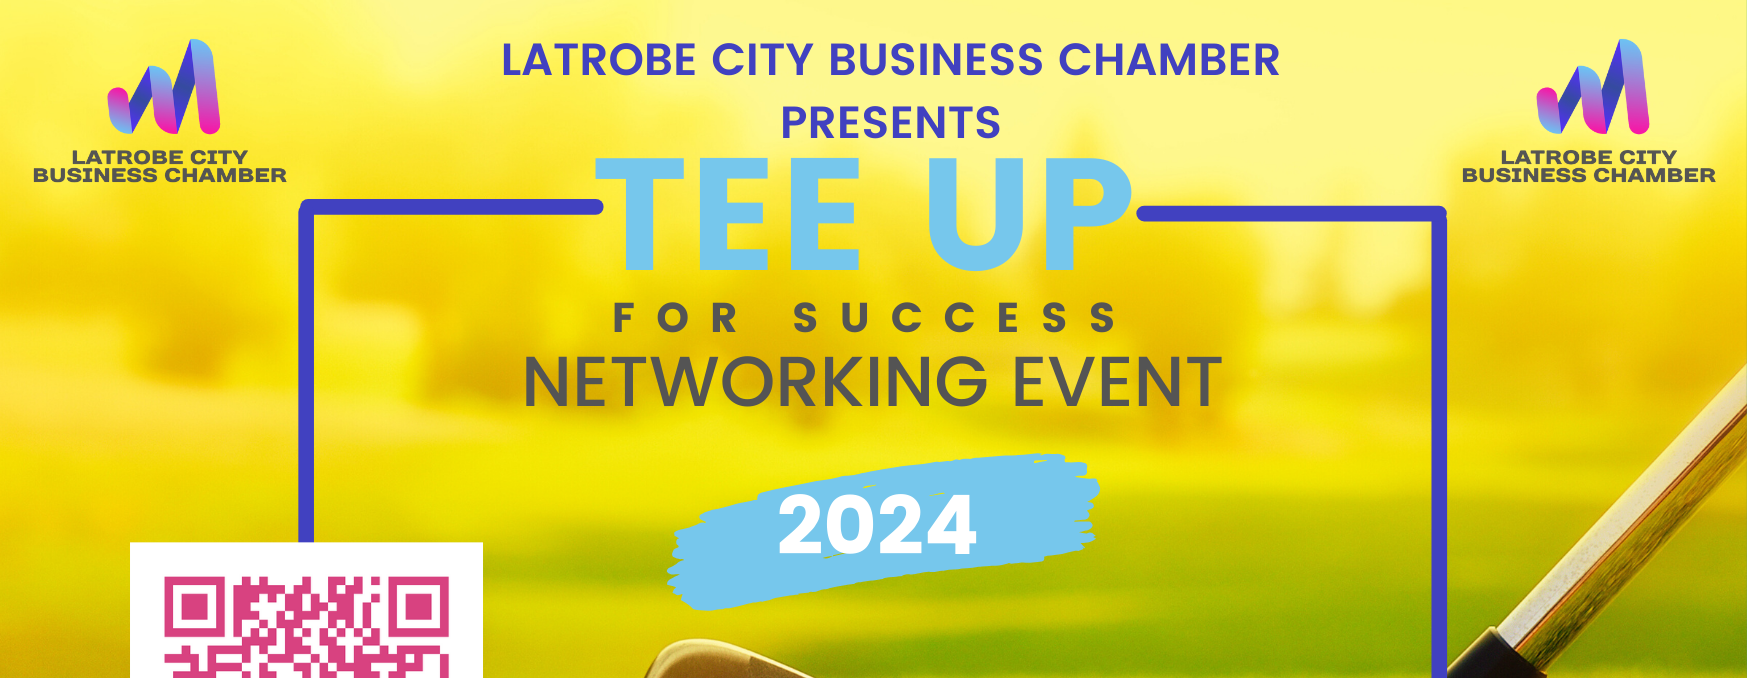 Tee Up For Success – Golf Day Networking Event